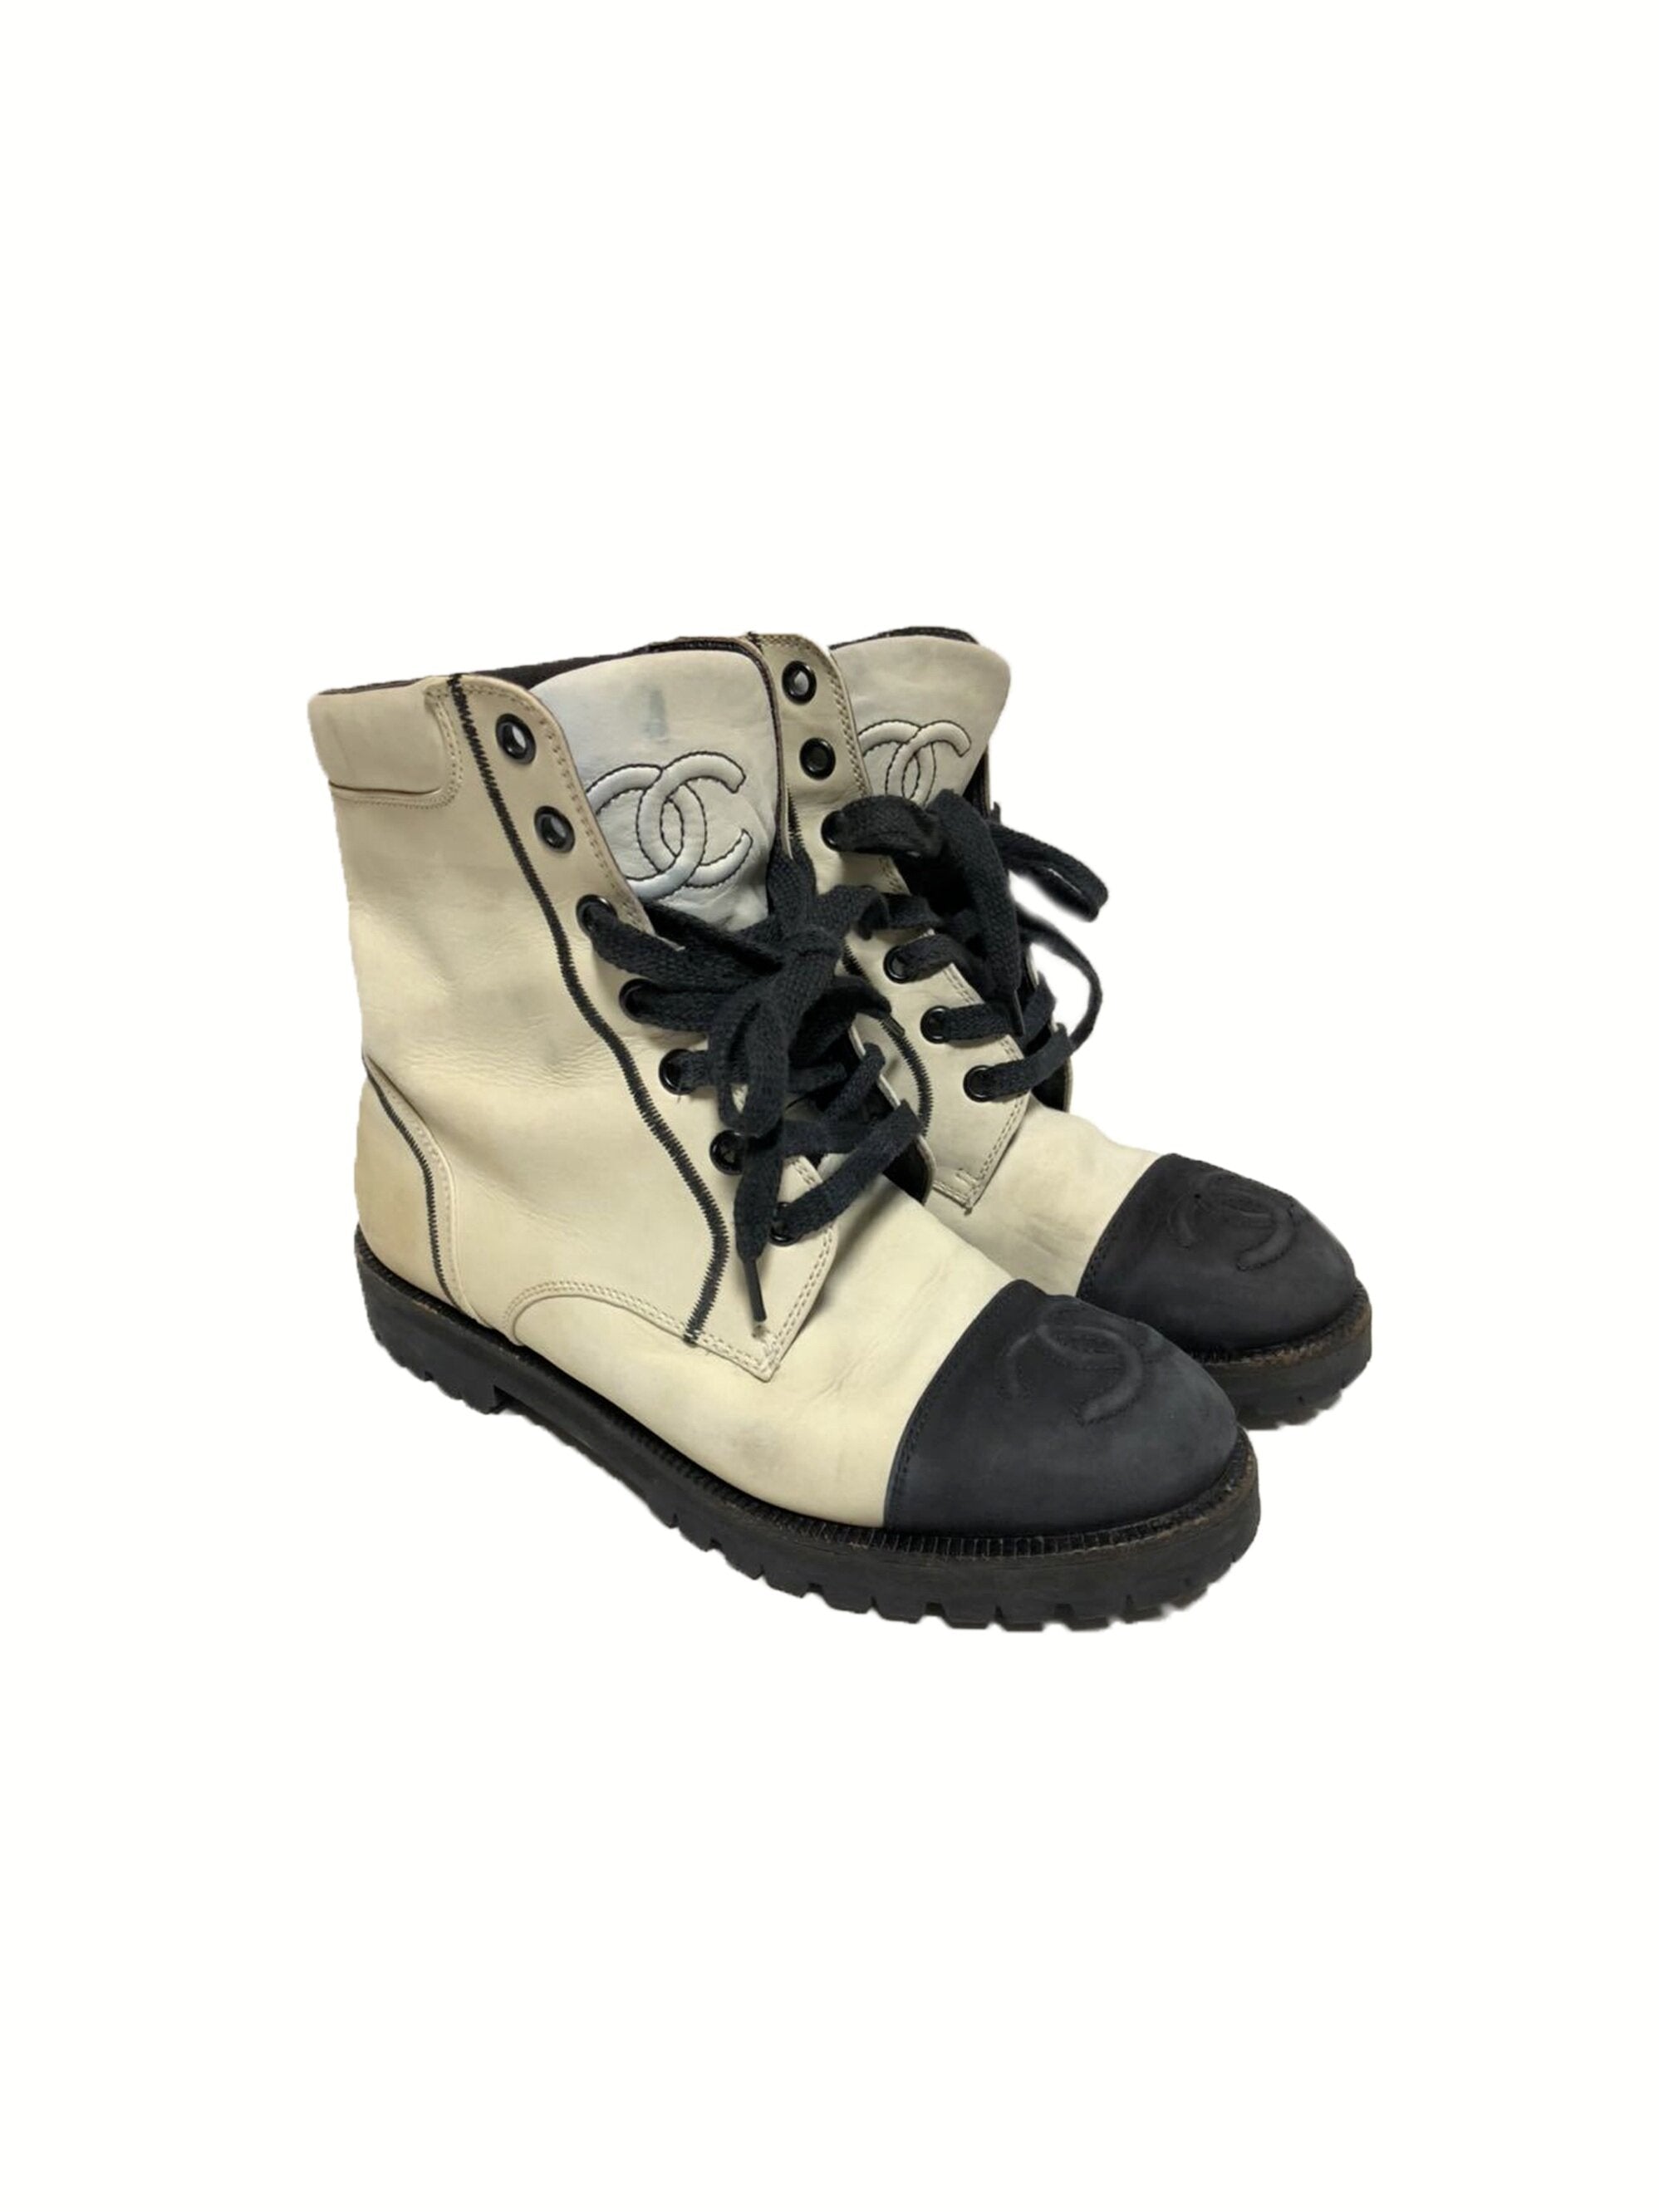 Chanel Combat Boots - Beige/Black, New In Box